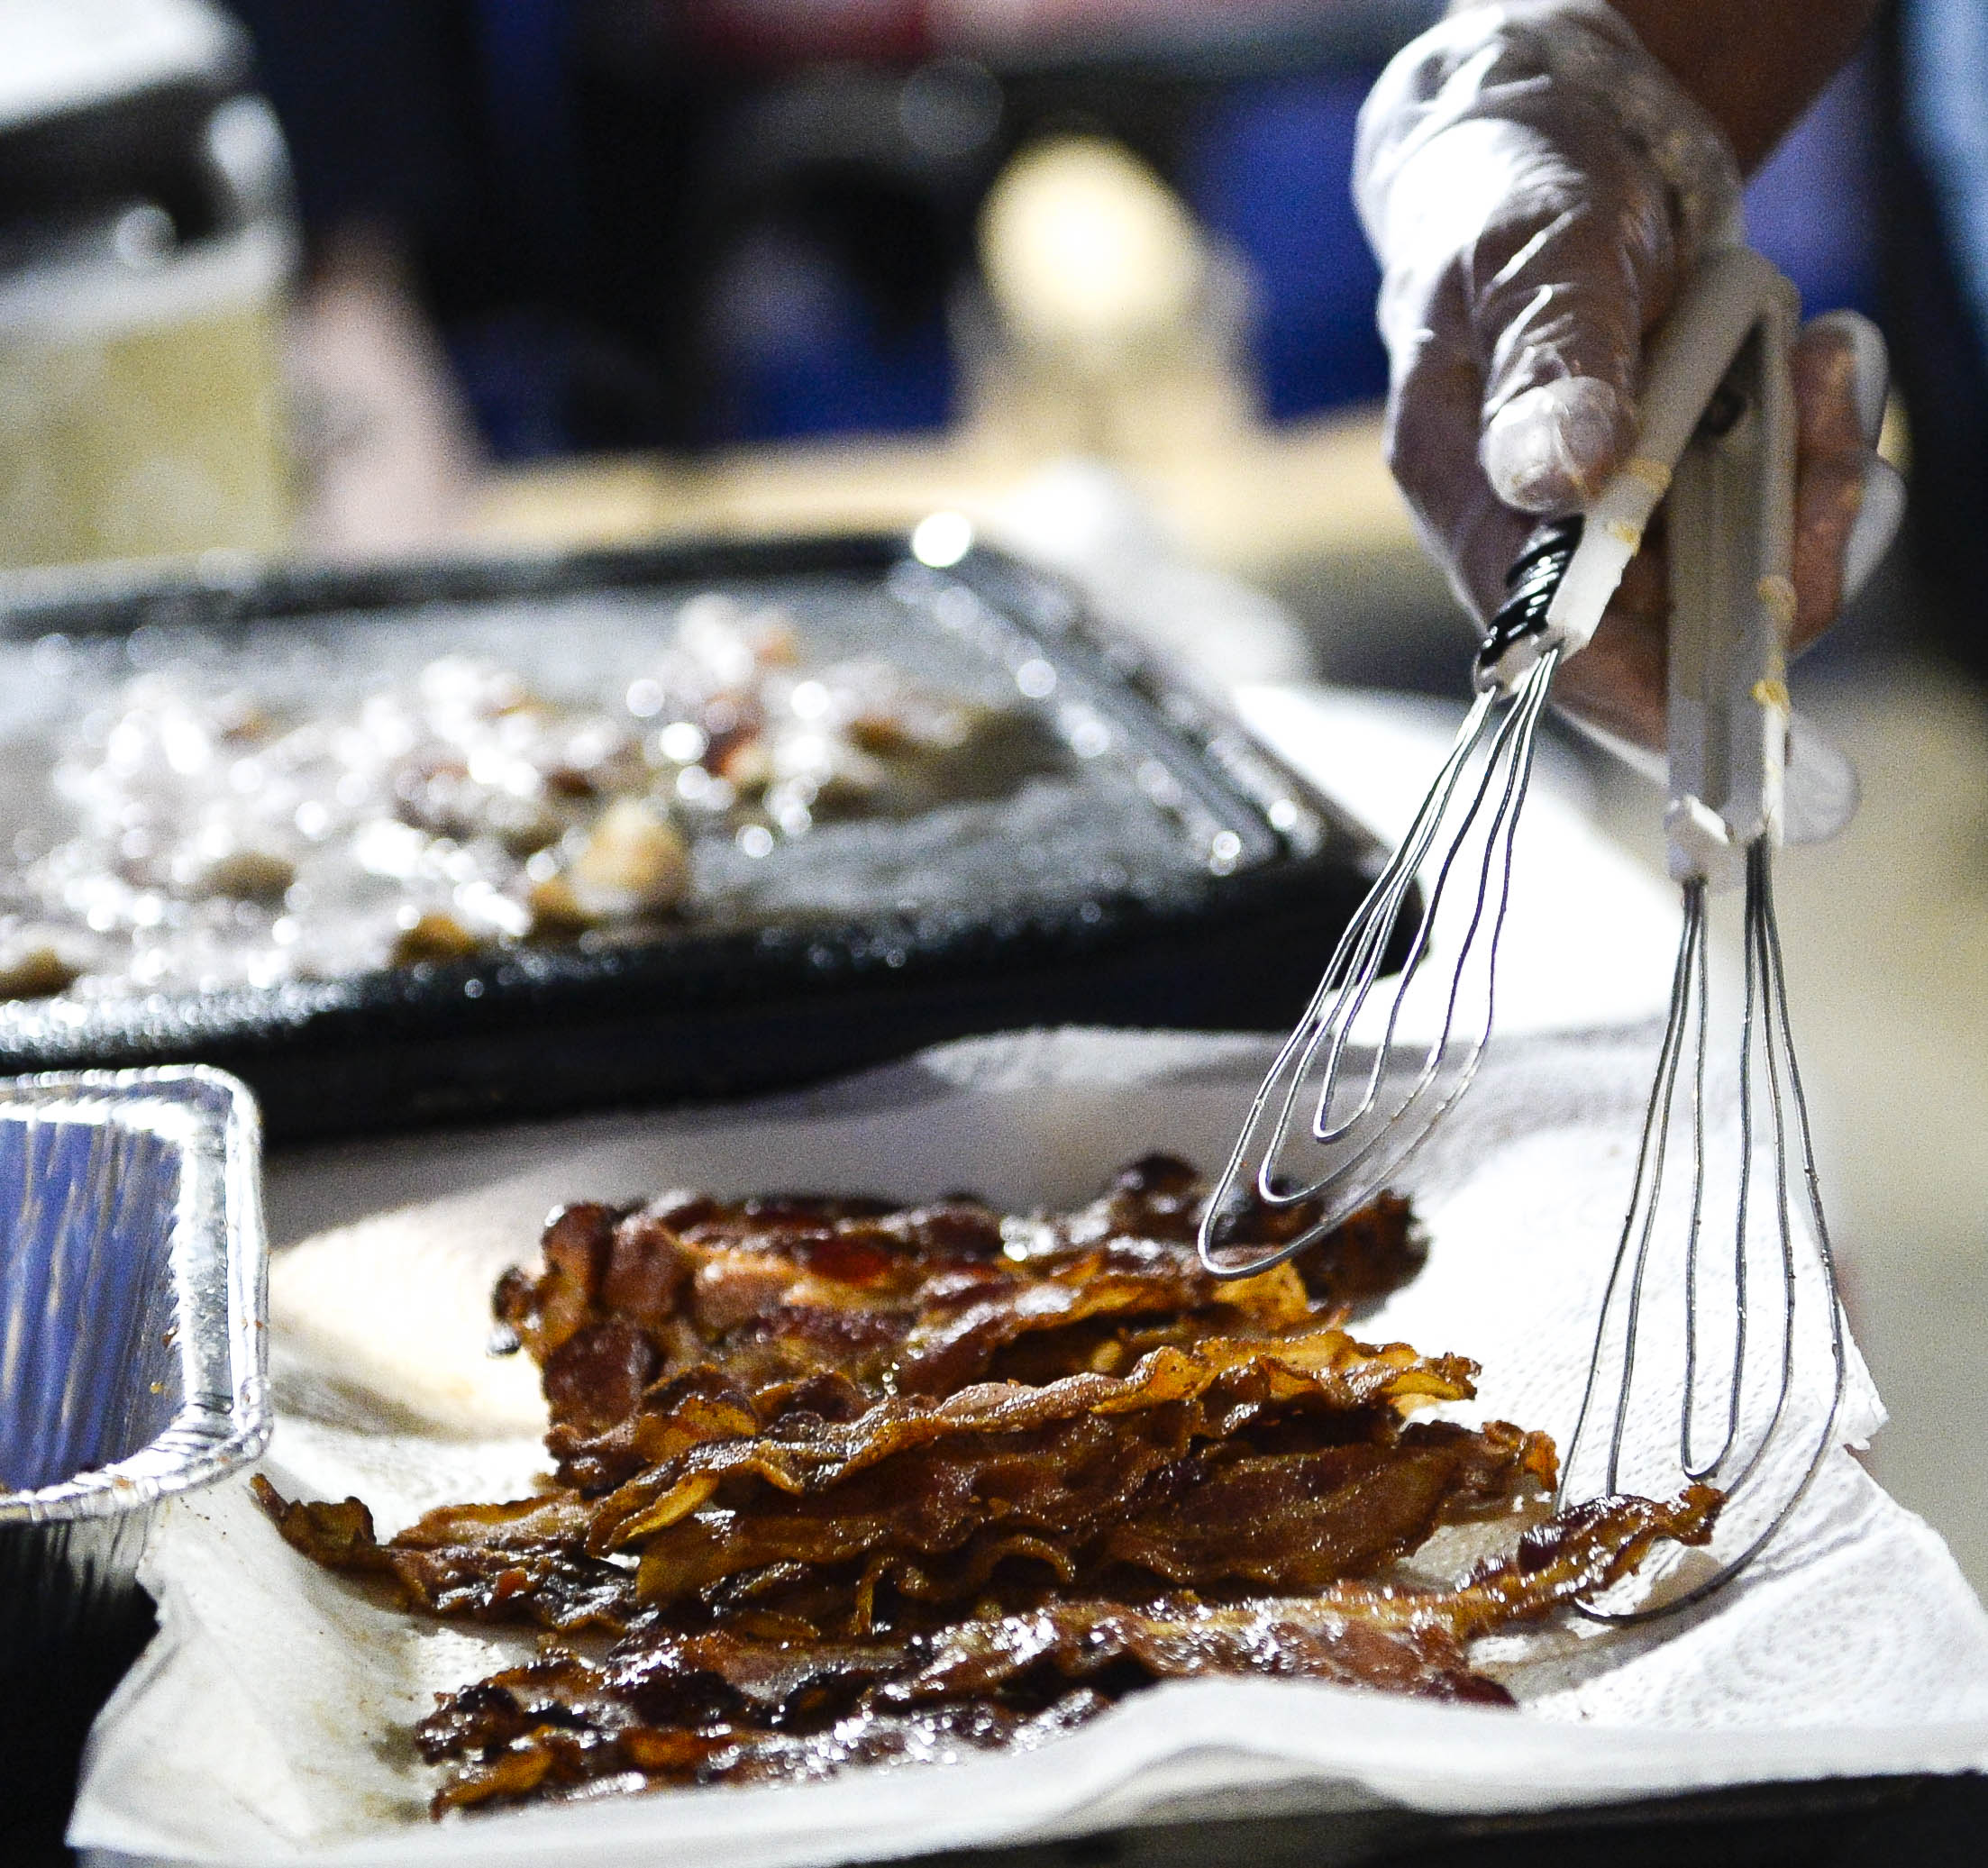   Susie McCreary, 76, owner of the St. Joe Harley Davidson fries bacon while preparing a jalapeno balmers recipe her employee, Jackie Kalinka, 28, came up with for the recipe contest. “She's our designated bacon cooker today because it’s the most imp